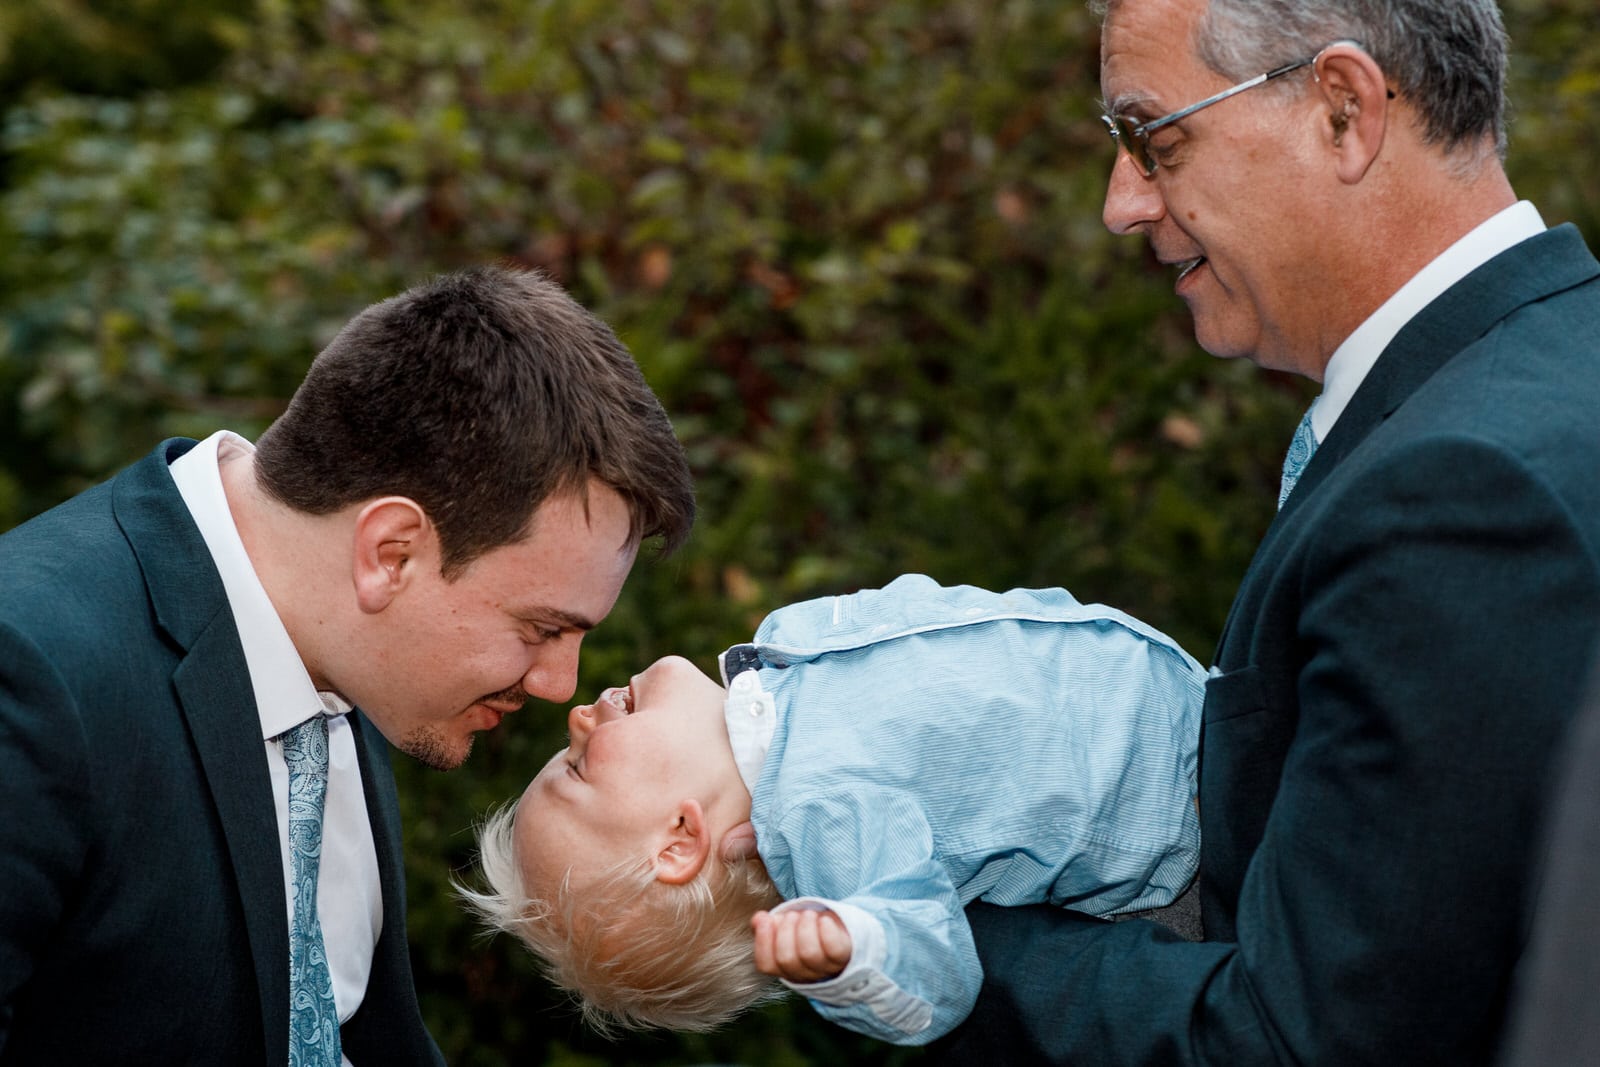 kid being kissed by father at wedding day 